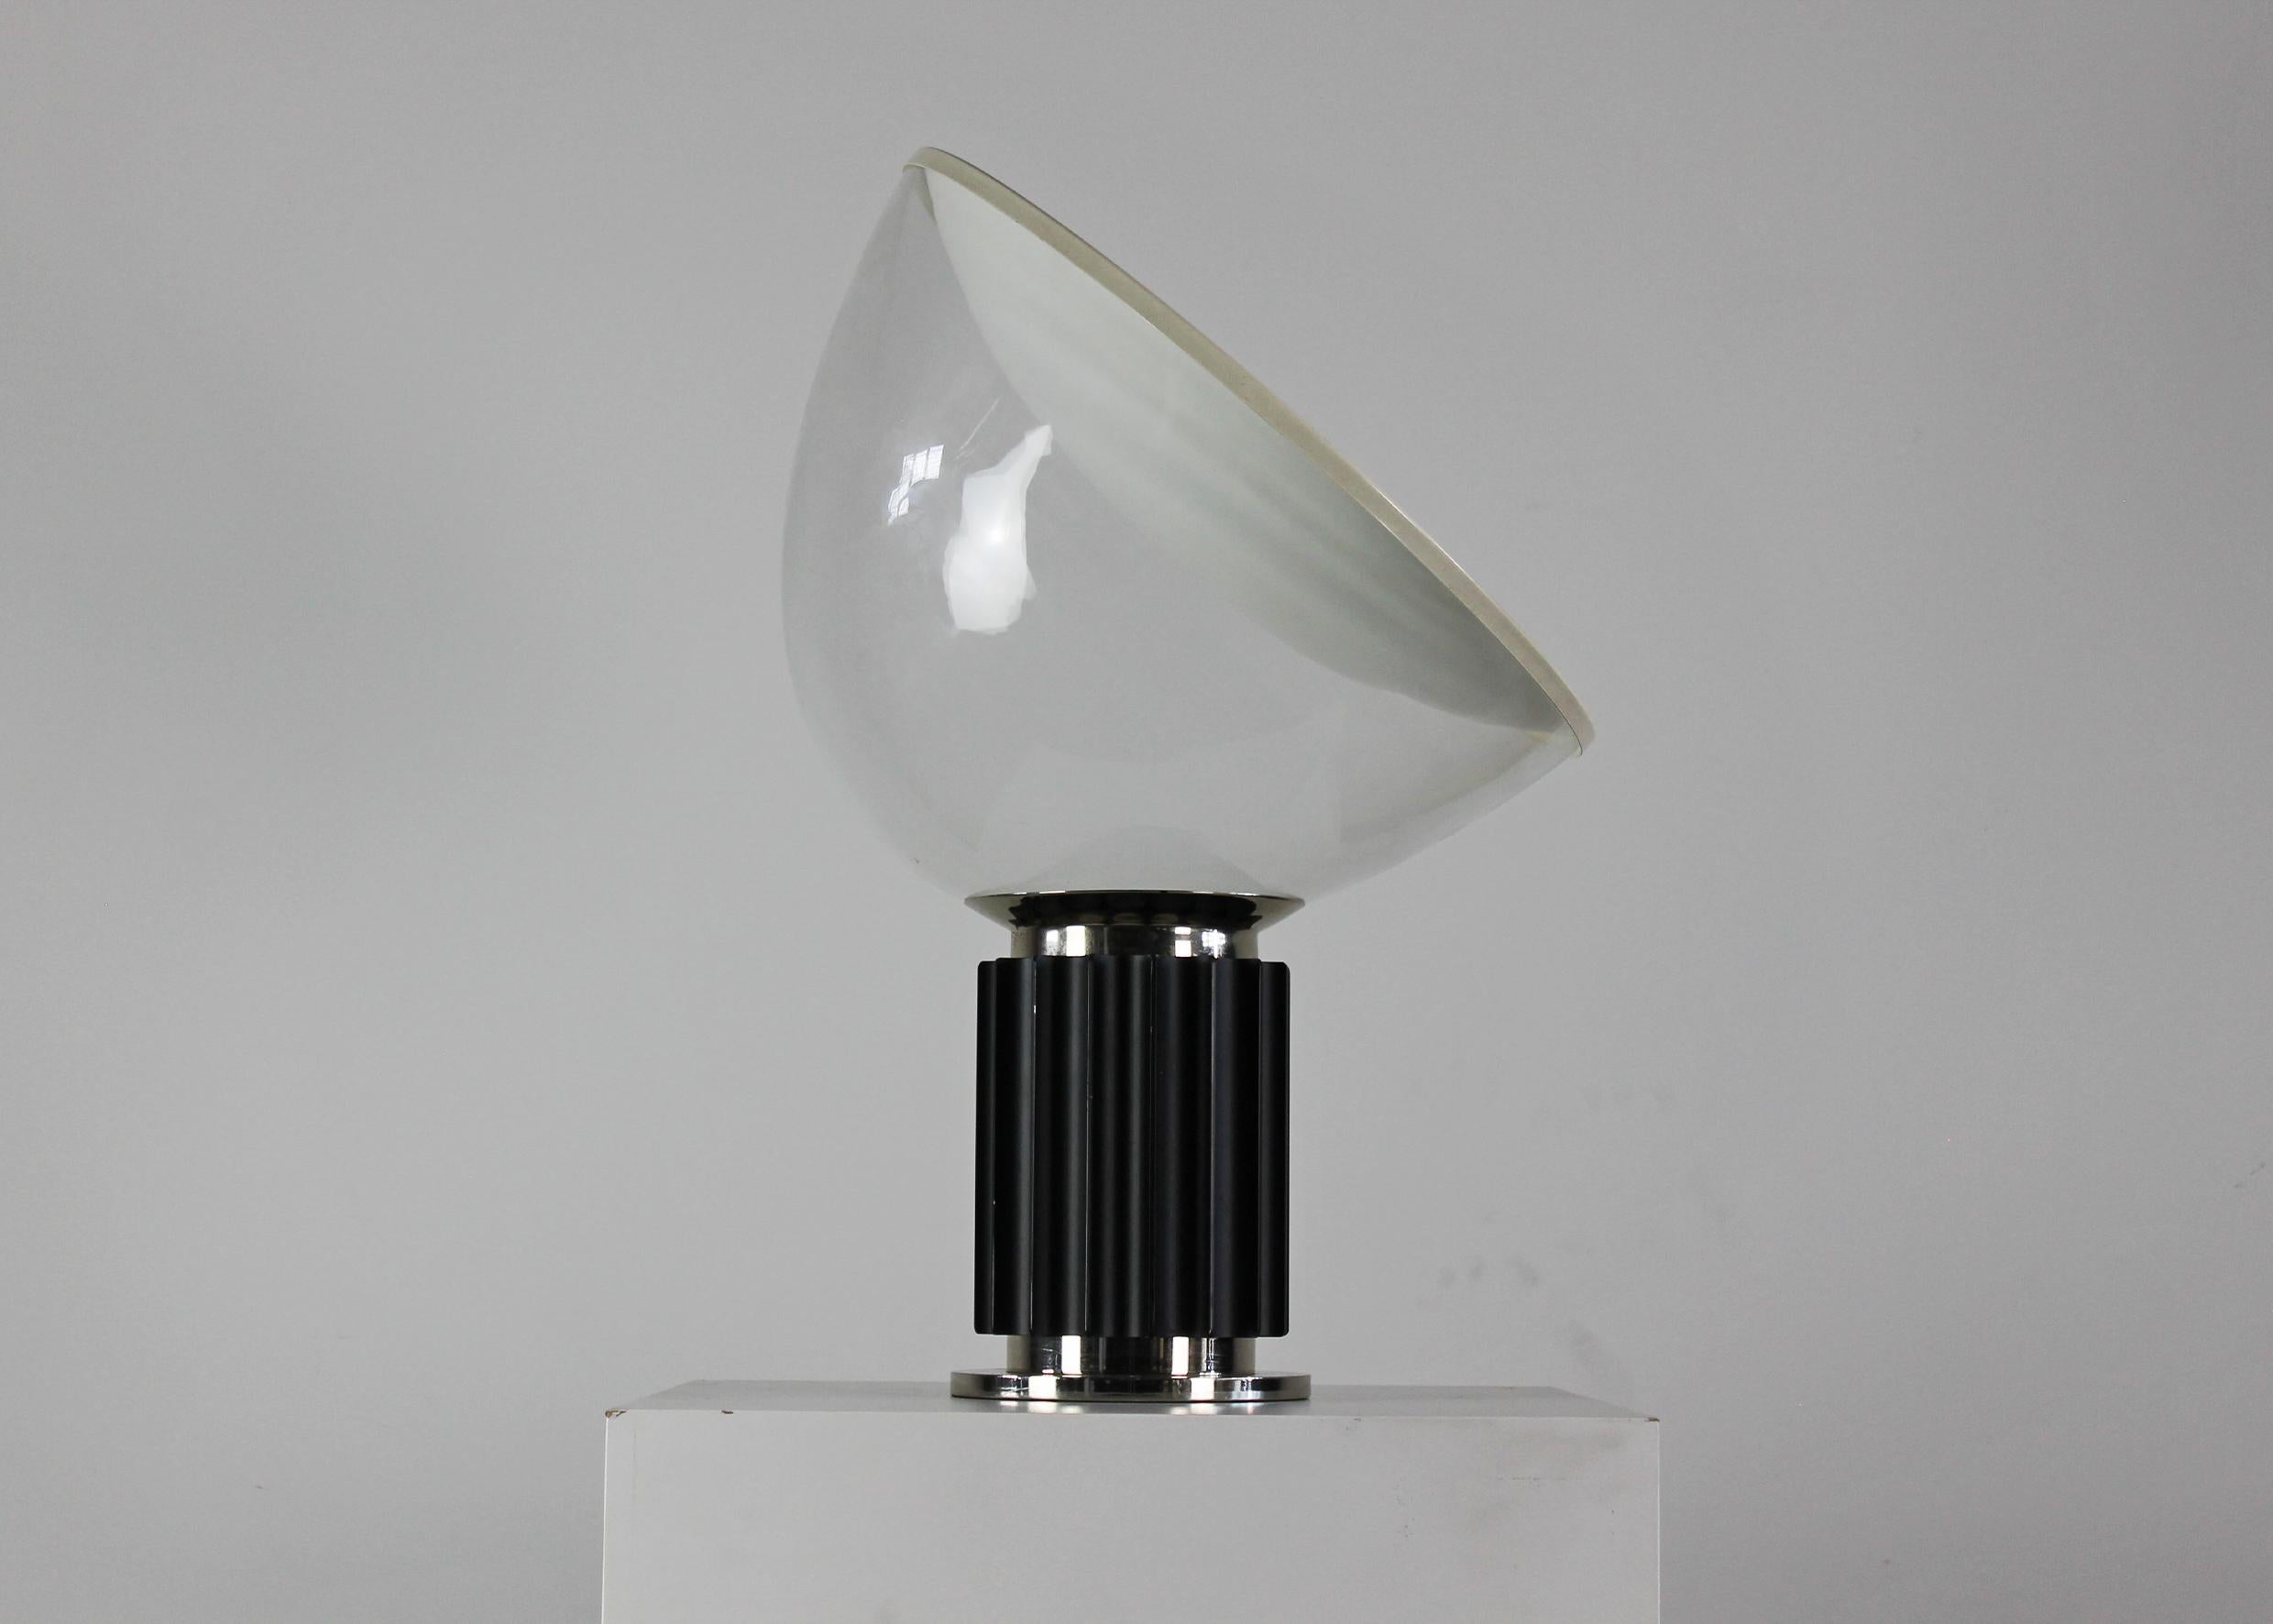 Taccia table lamp with a base realized in cast aluminum and chromed brass, lampshade in blown glass, and white lacquered aluminum designed by Achille and Pier Giacomo Castiglioni in 1962 for Flos, Italy.

The manufacturer's label is visible inside